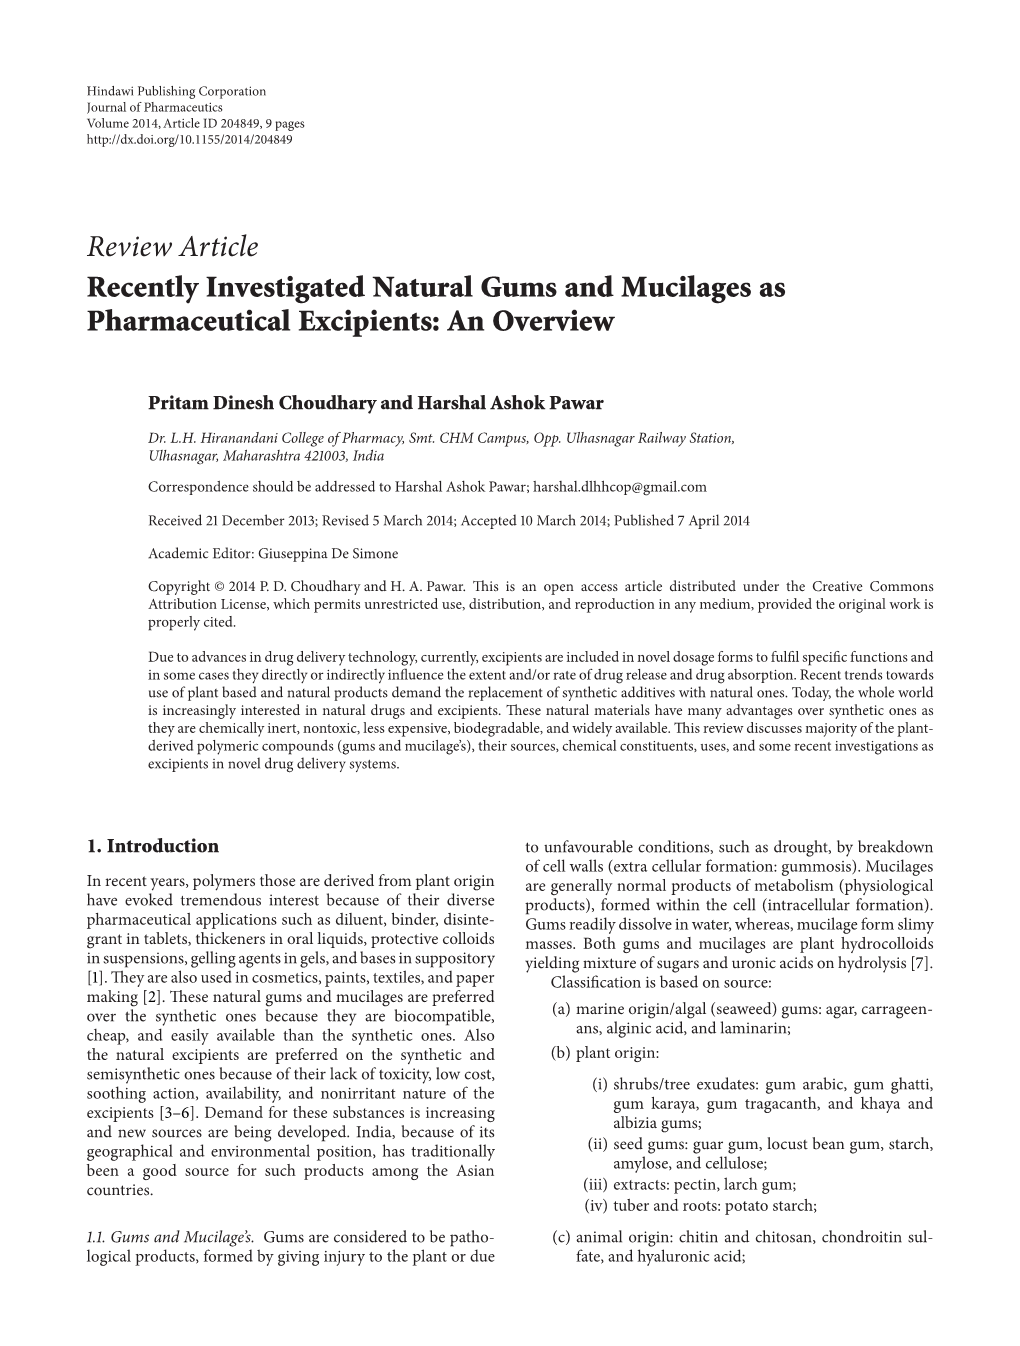 Recently Investigated Natural Gums and Mucilages As Pharmaceutical Excipients: an Overview